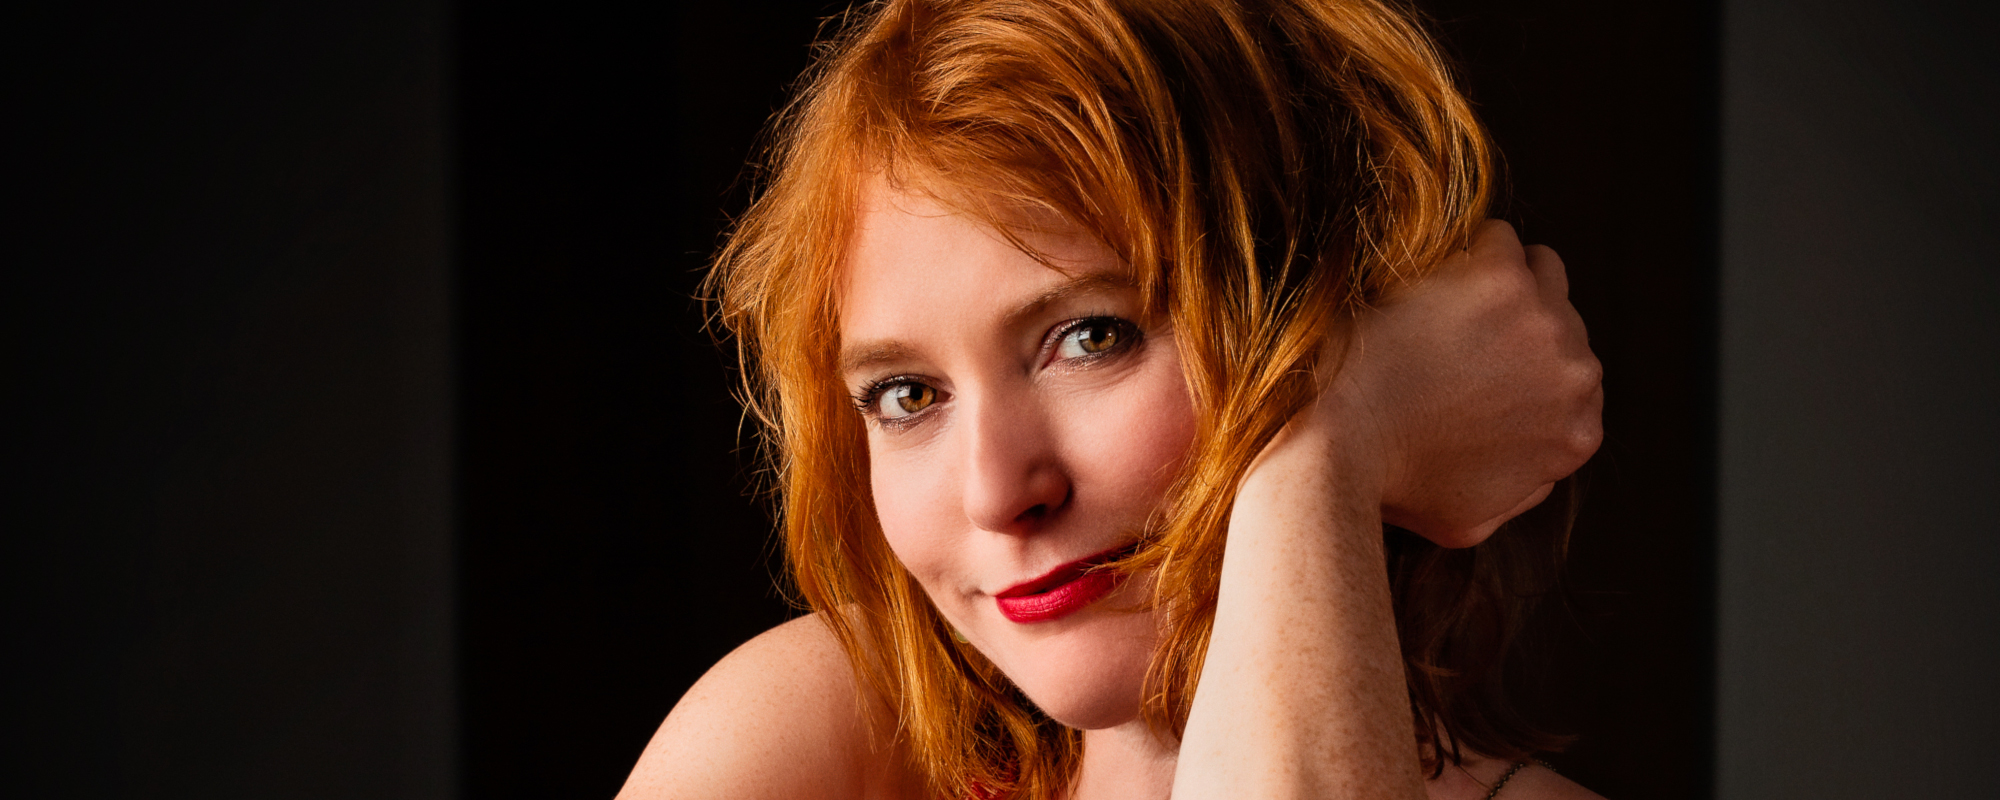 Off The Record: Beloved Actress and Celebrated Pianist, Alicia Witt, Talks Songwriting, New Album, and More